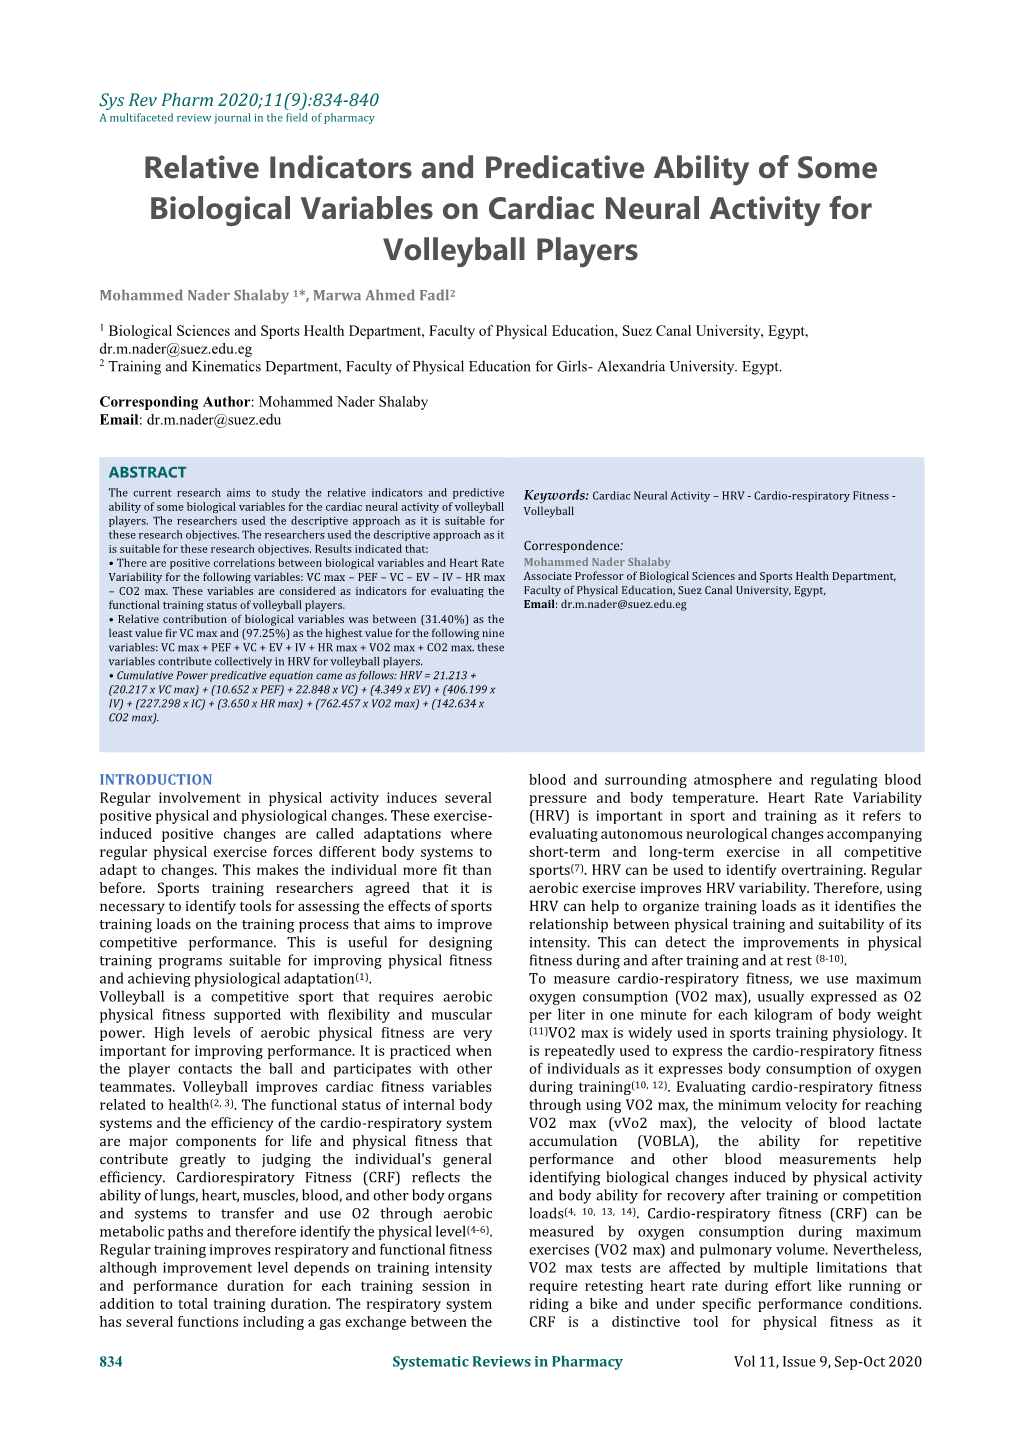 Relative Indicators and Predicative Ability of Some Biological Variables on Cardiac Neural Activity for Volleyball Players